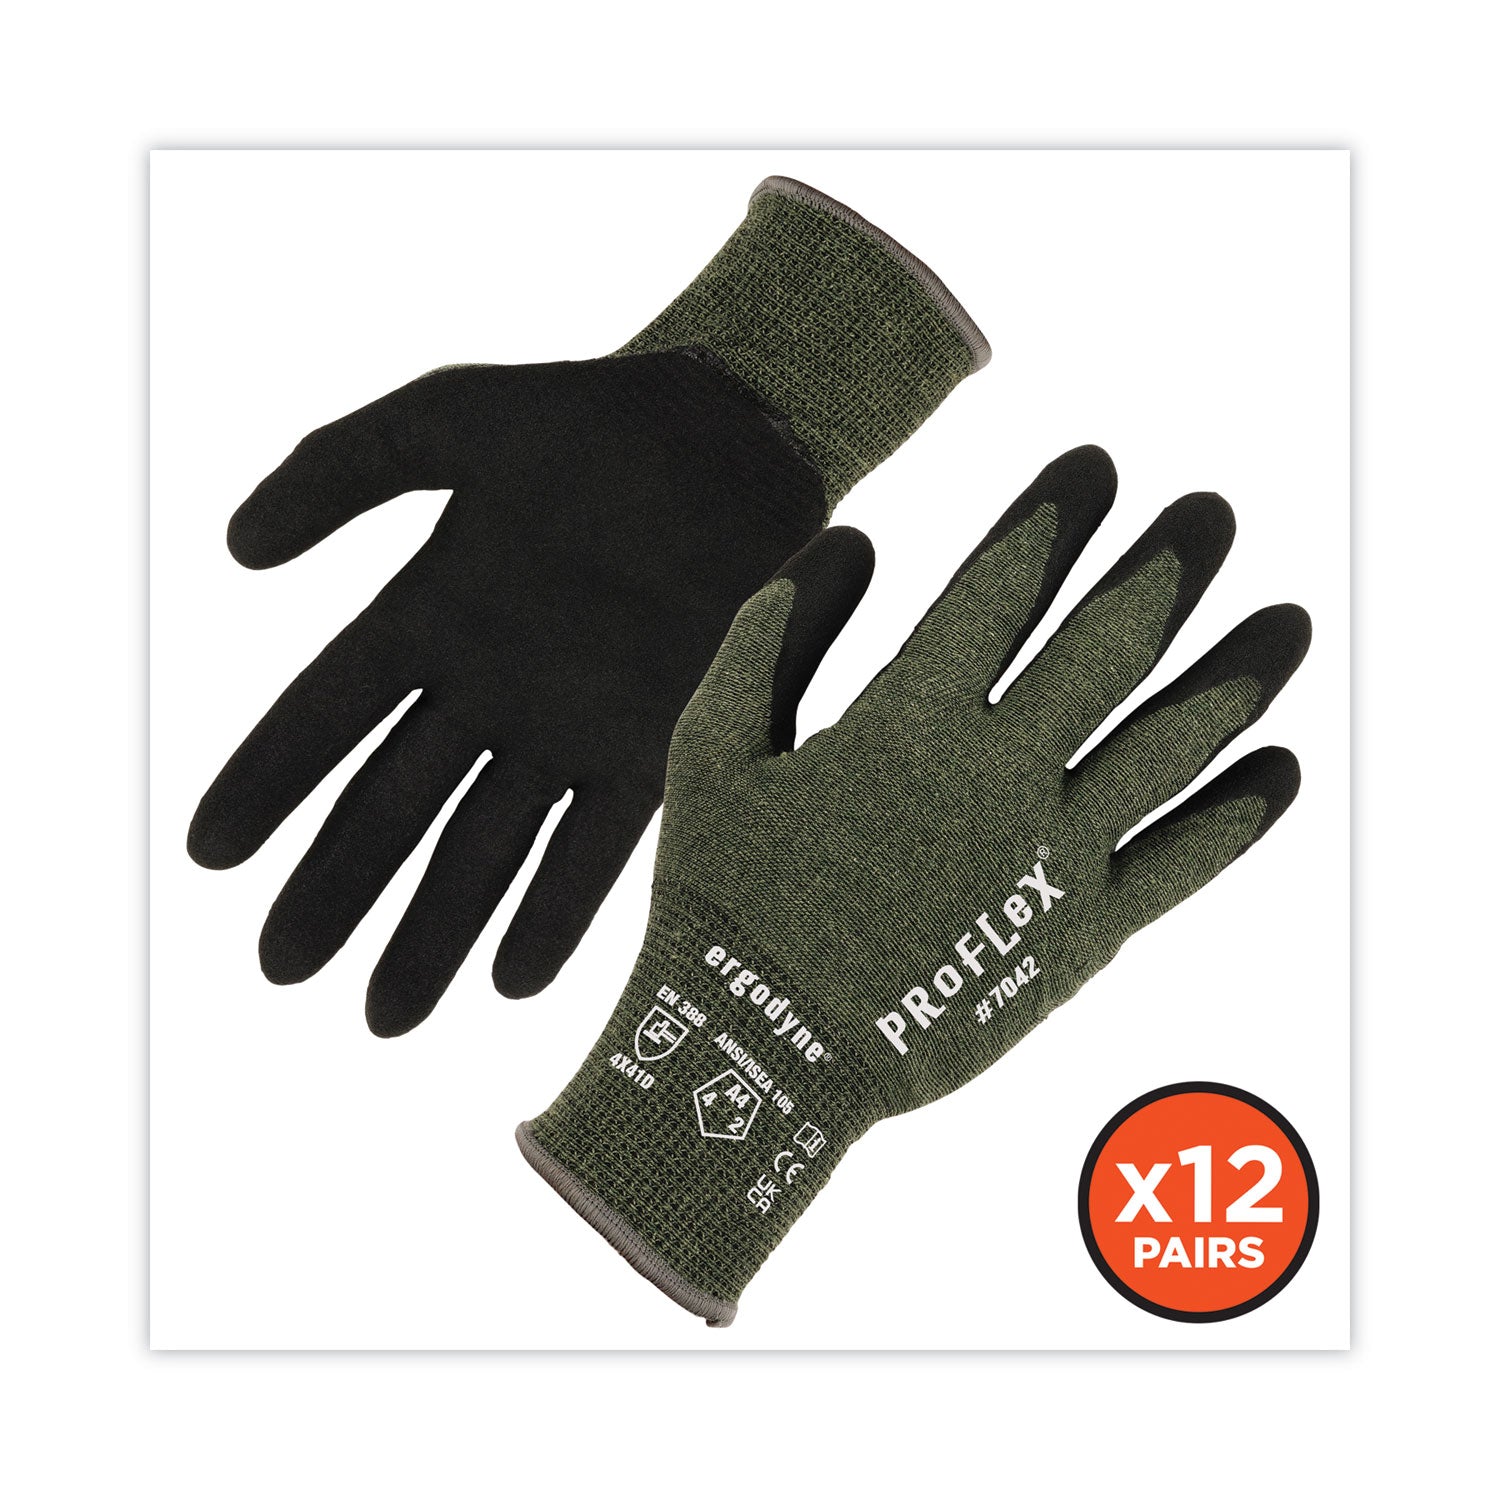 proflex-7042-ansi-a4-nitrile-coated-cr-gloves-green-large-12-pairs-pack-ships-in-1-3-business-days_ego10334 - 4